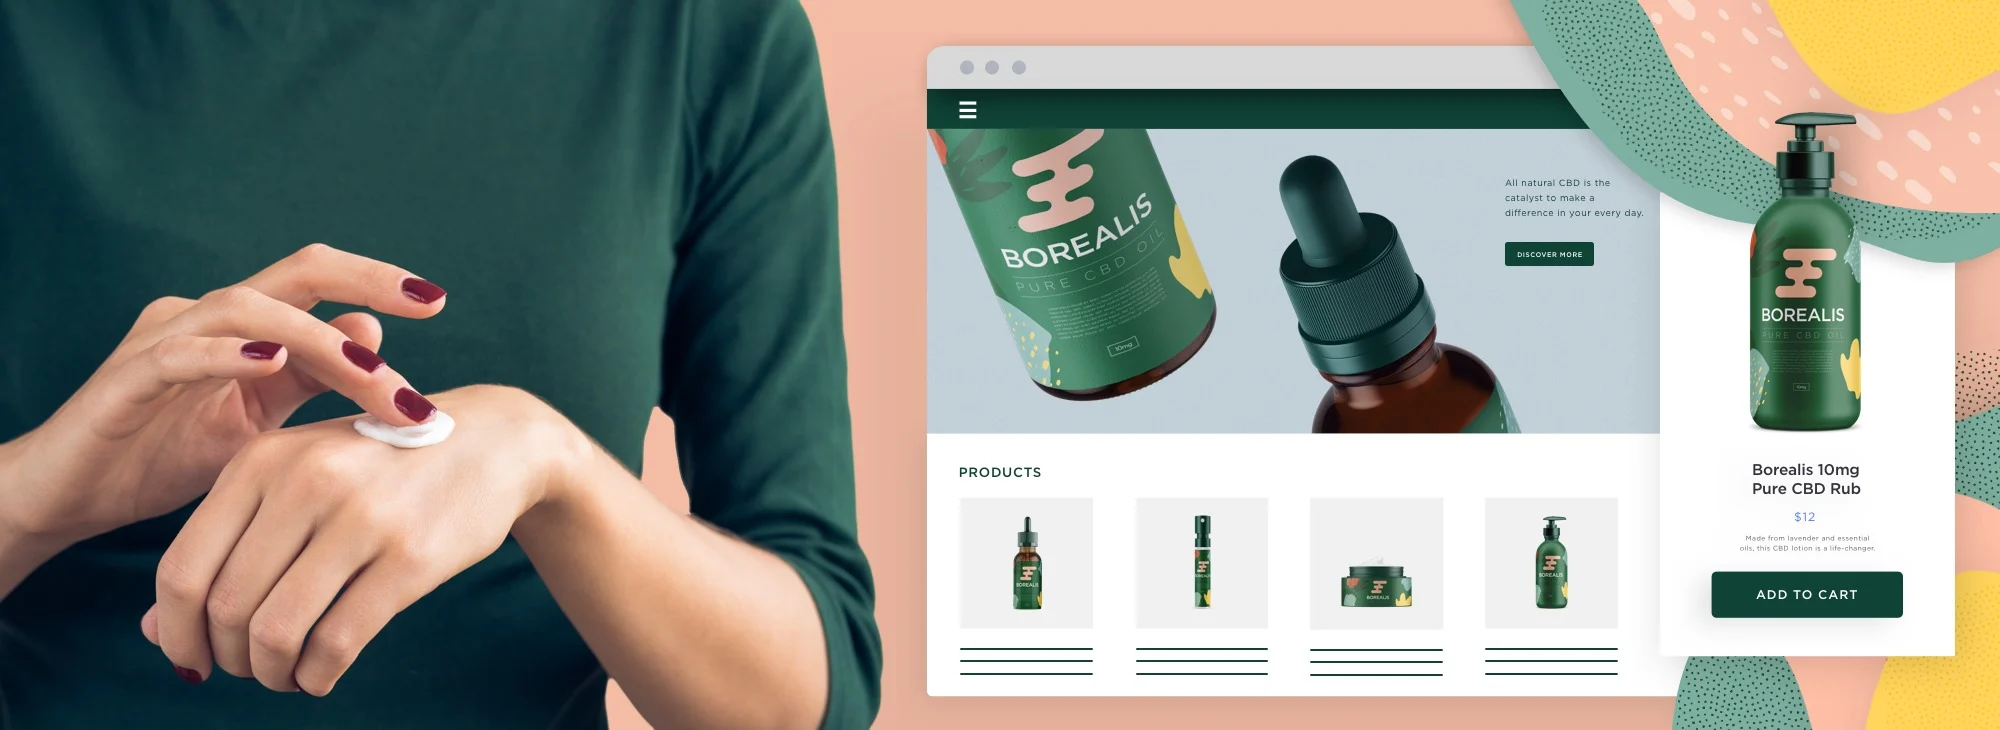 How to Start an online CBD Business in 10 Steps